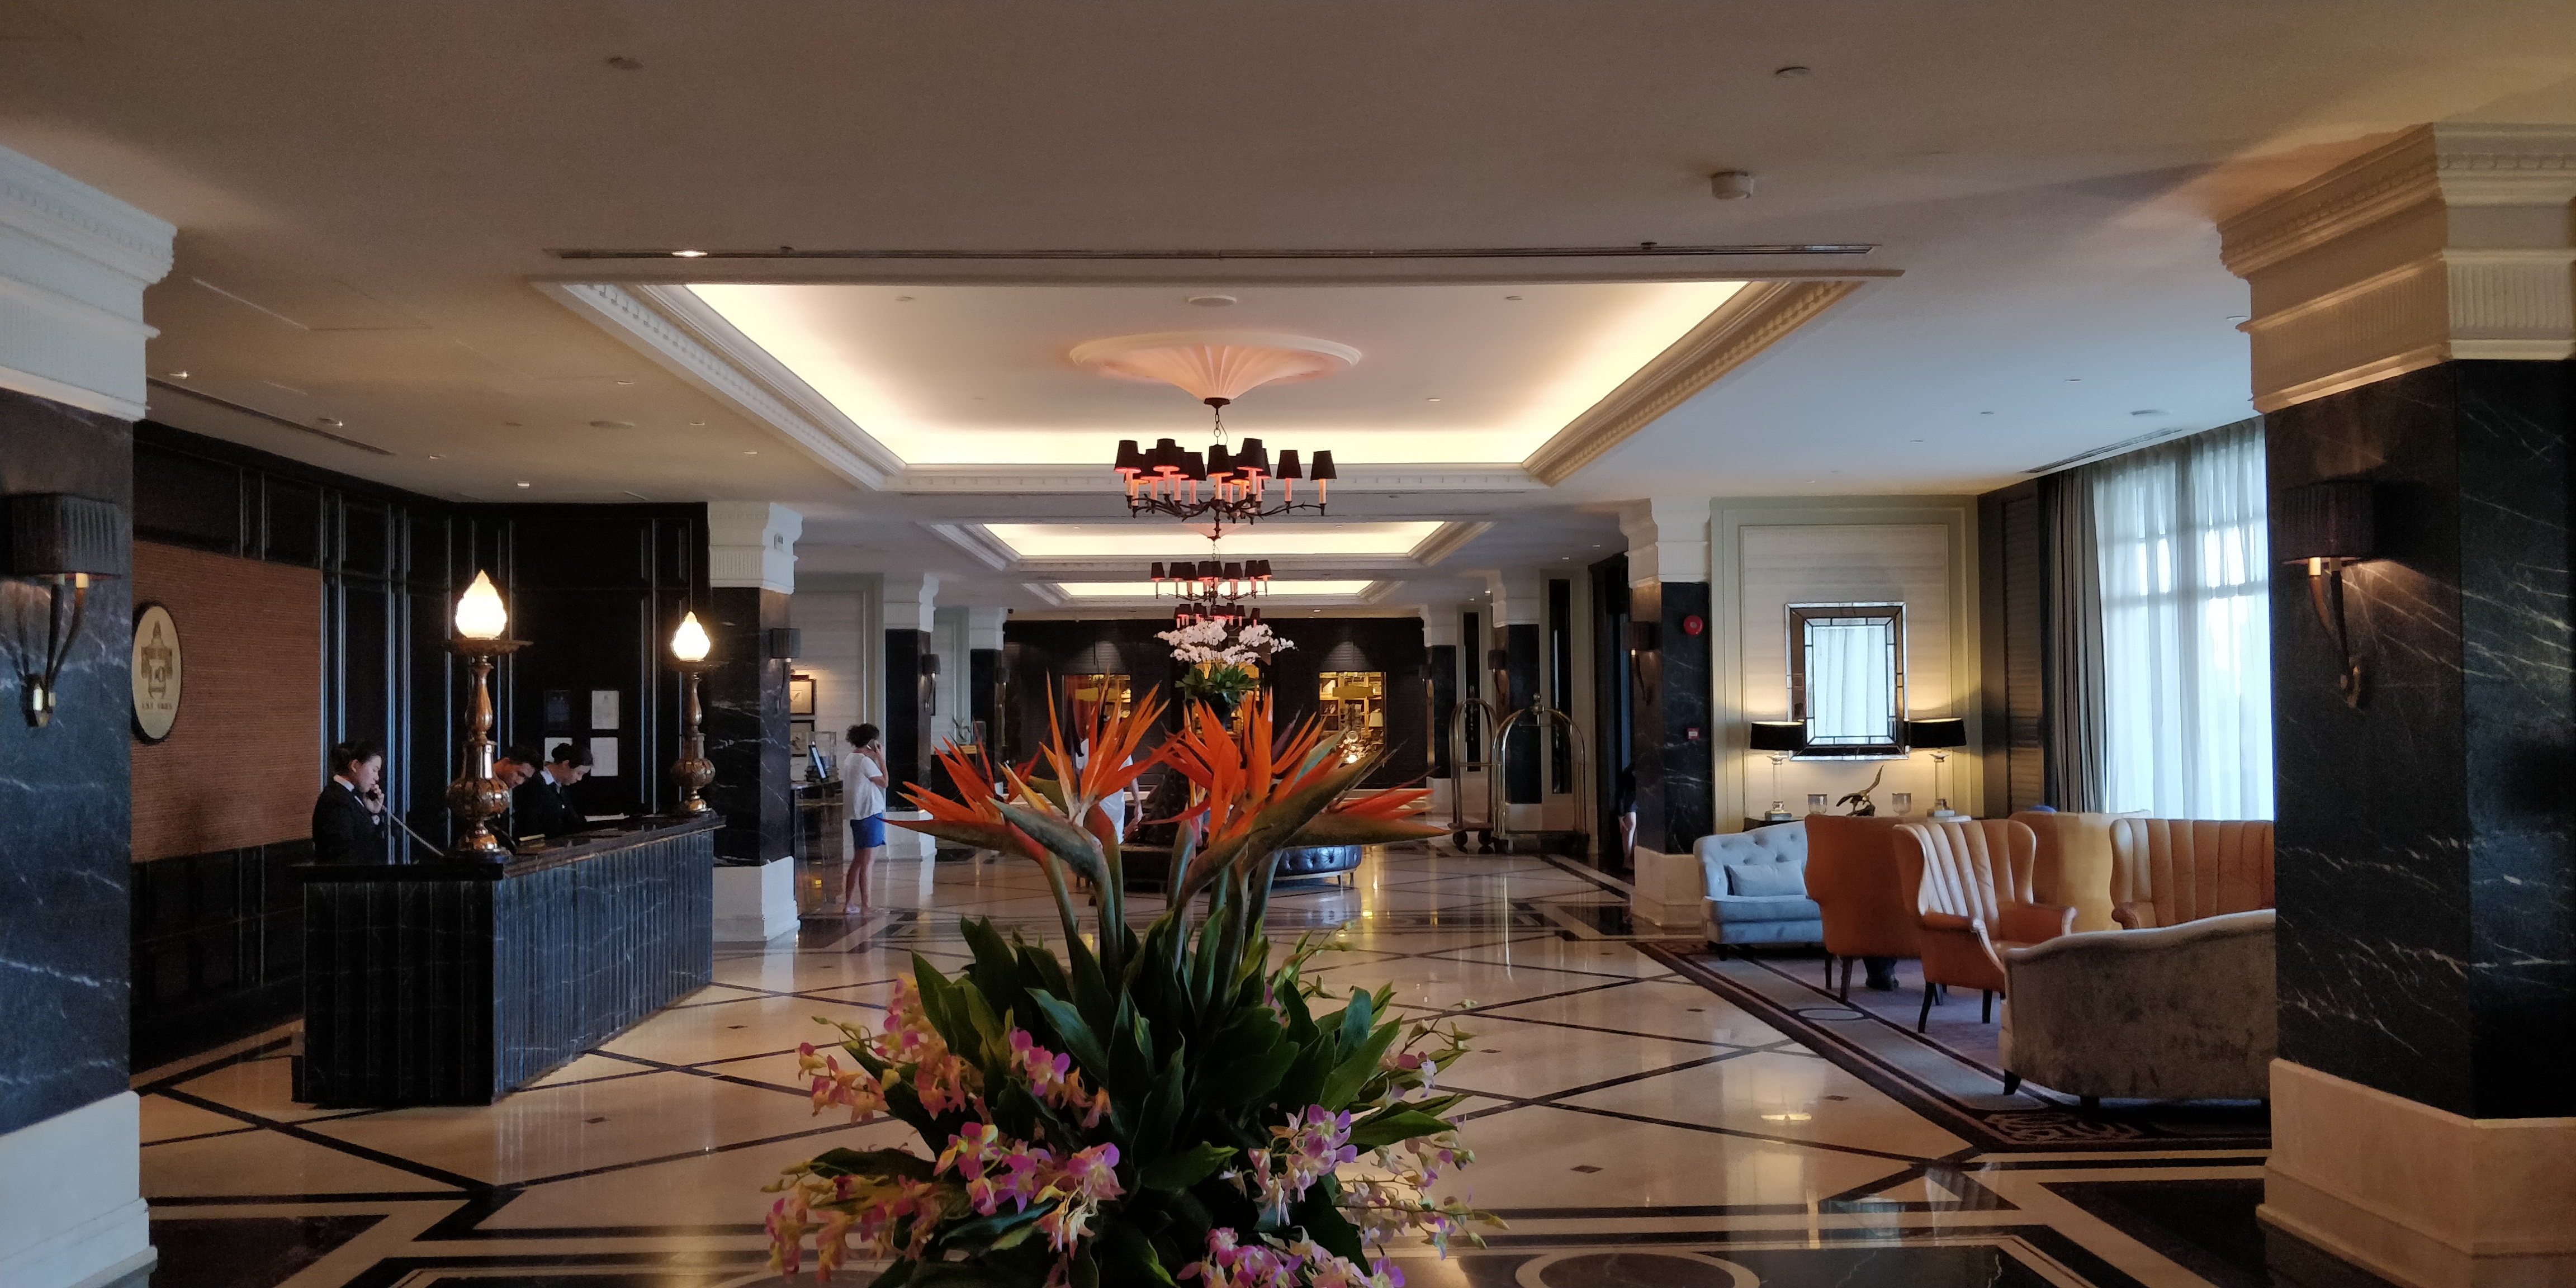 "A PICTURE OF THE MAIN LOBBY E&O HOTEL